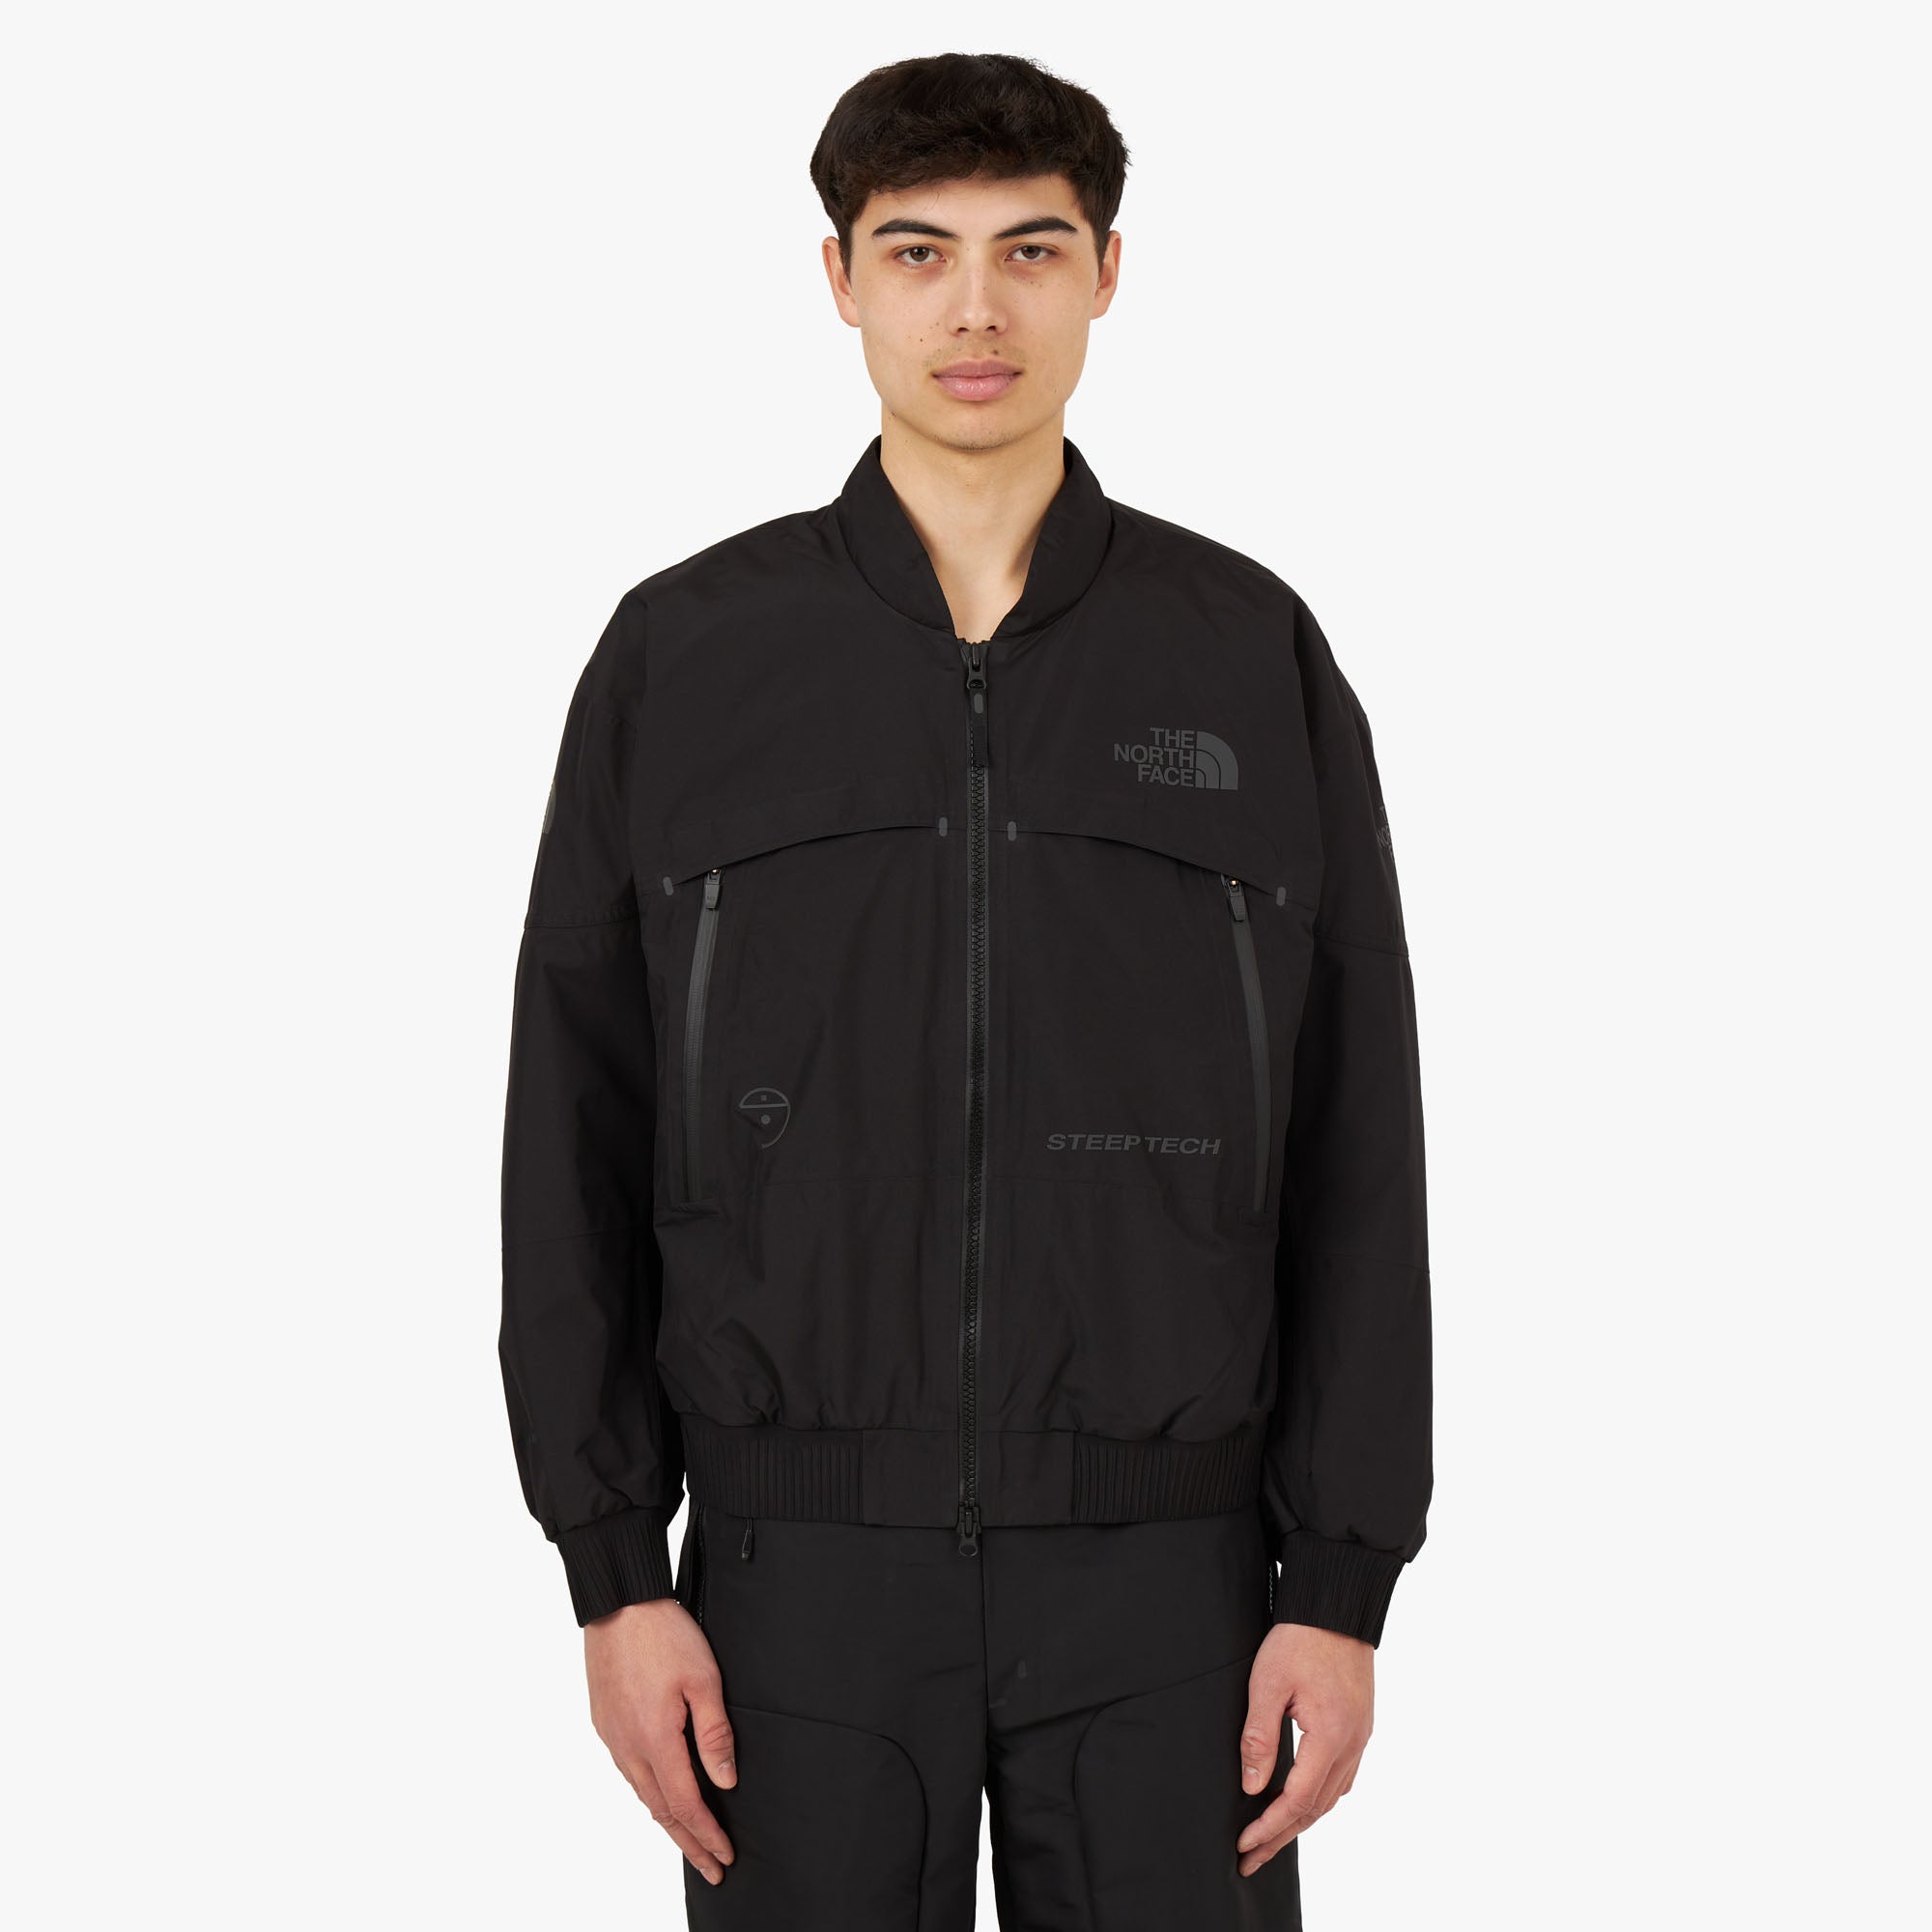 The North Face RMST Steep Tech Bomb Shell GORE-TEX Jacket / White Dune 1